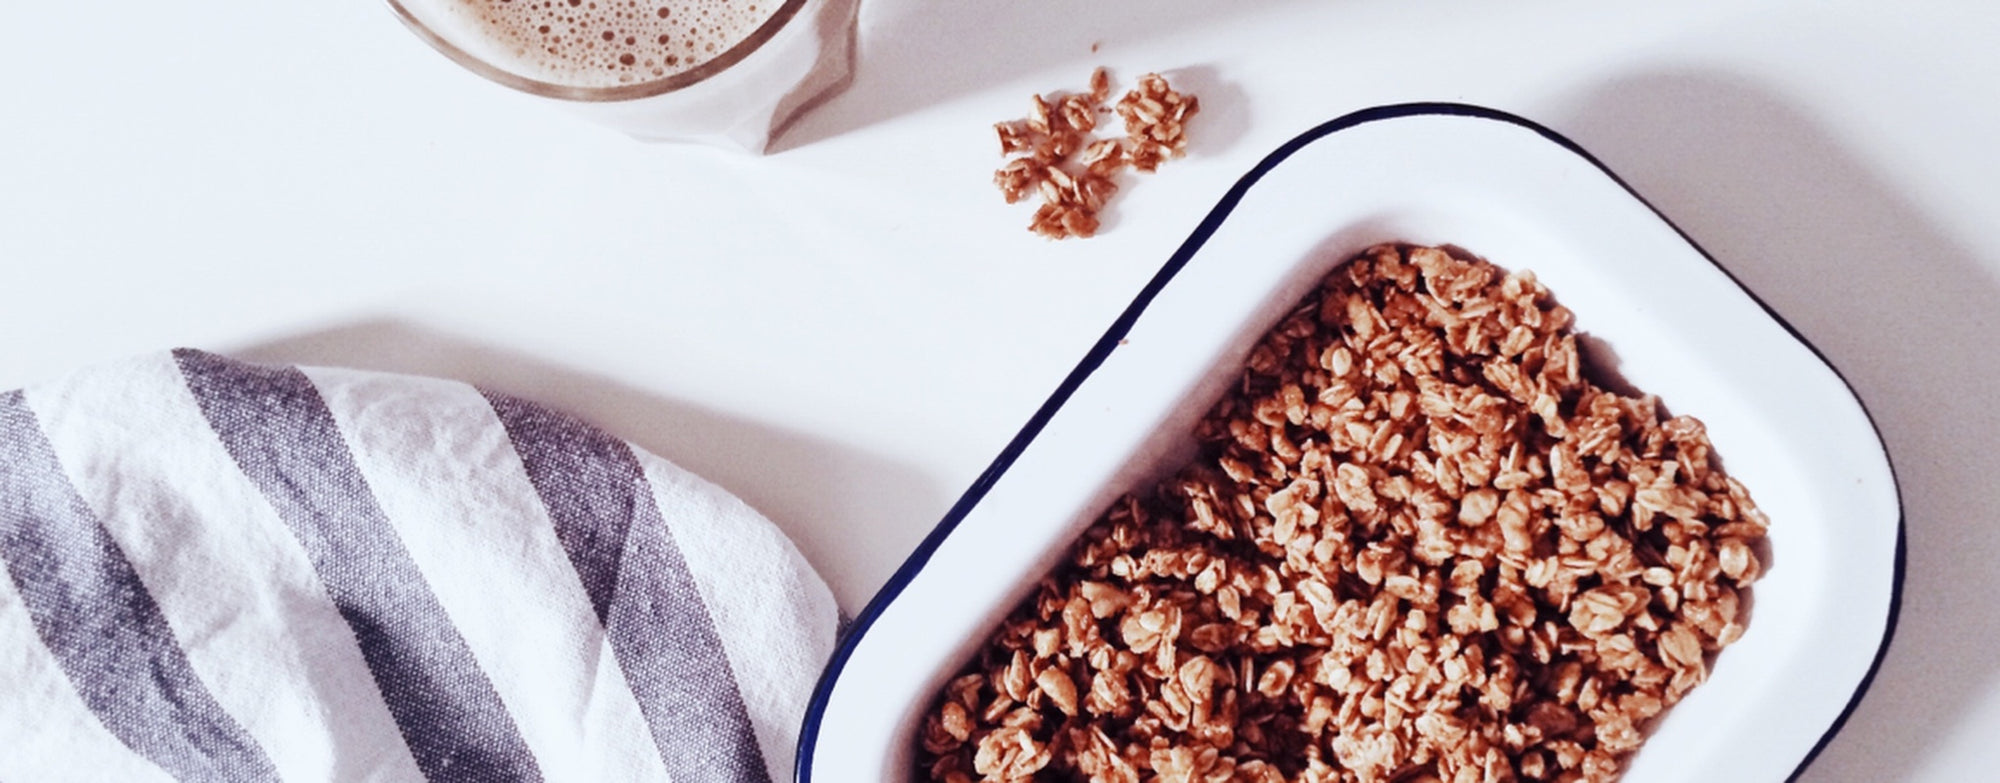 Homemade Granola Bars to Fuel Your Summer